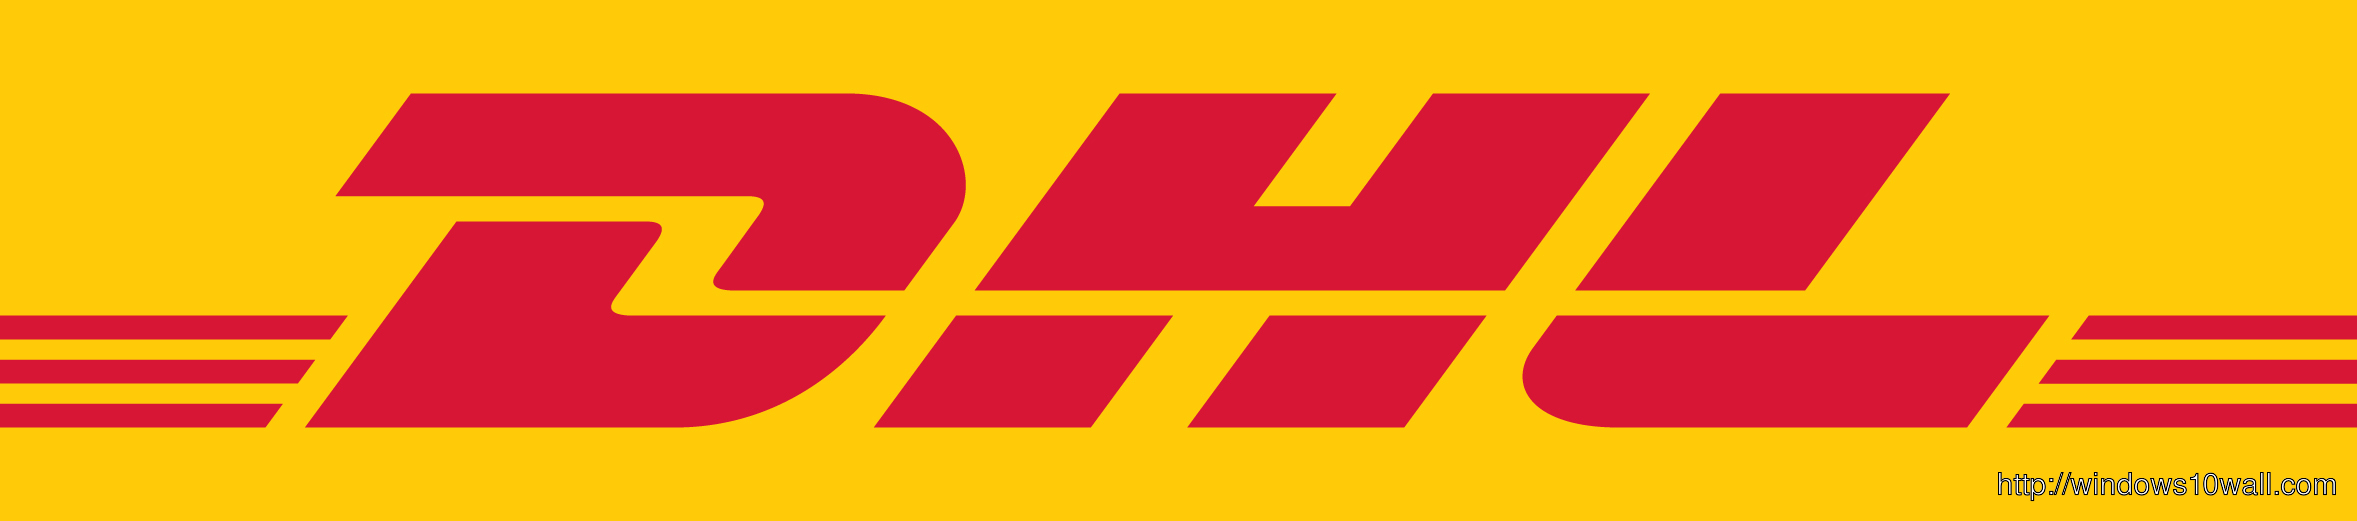 DHL logo - Logo Stage - logo gallery for logo lovers